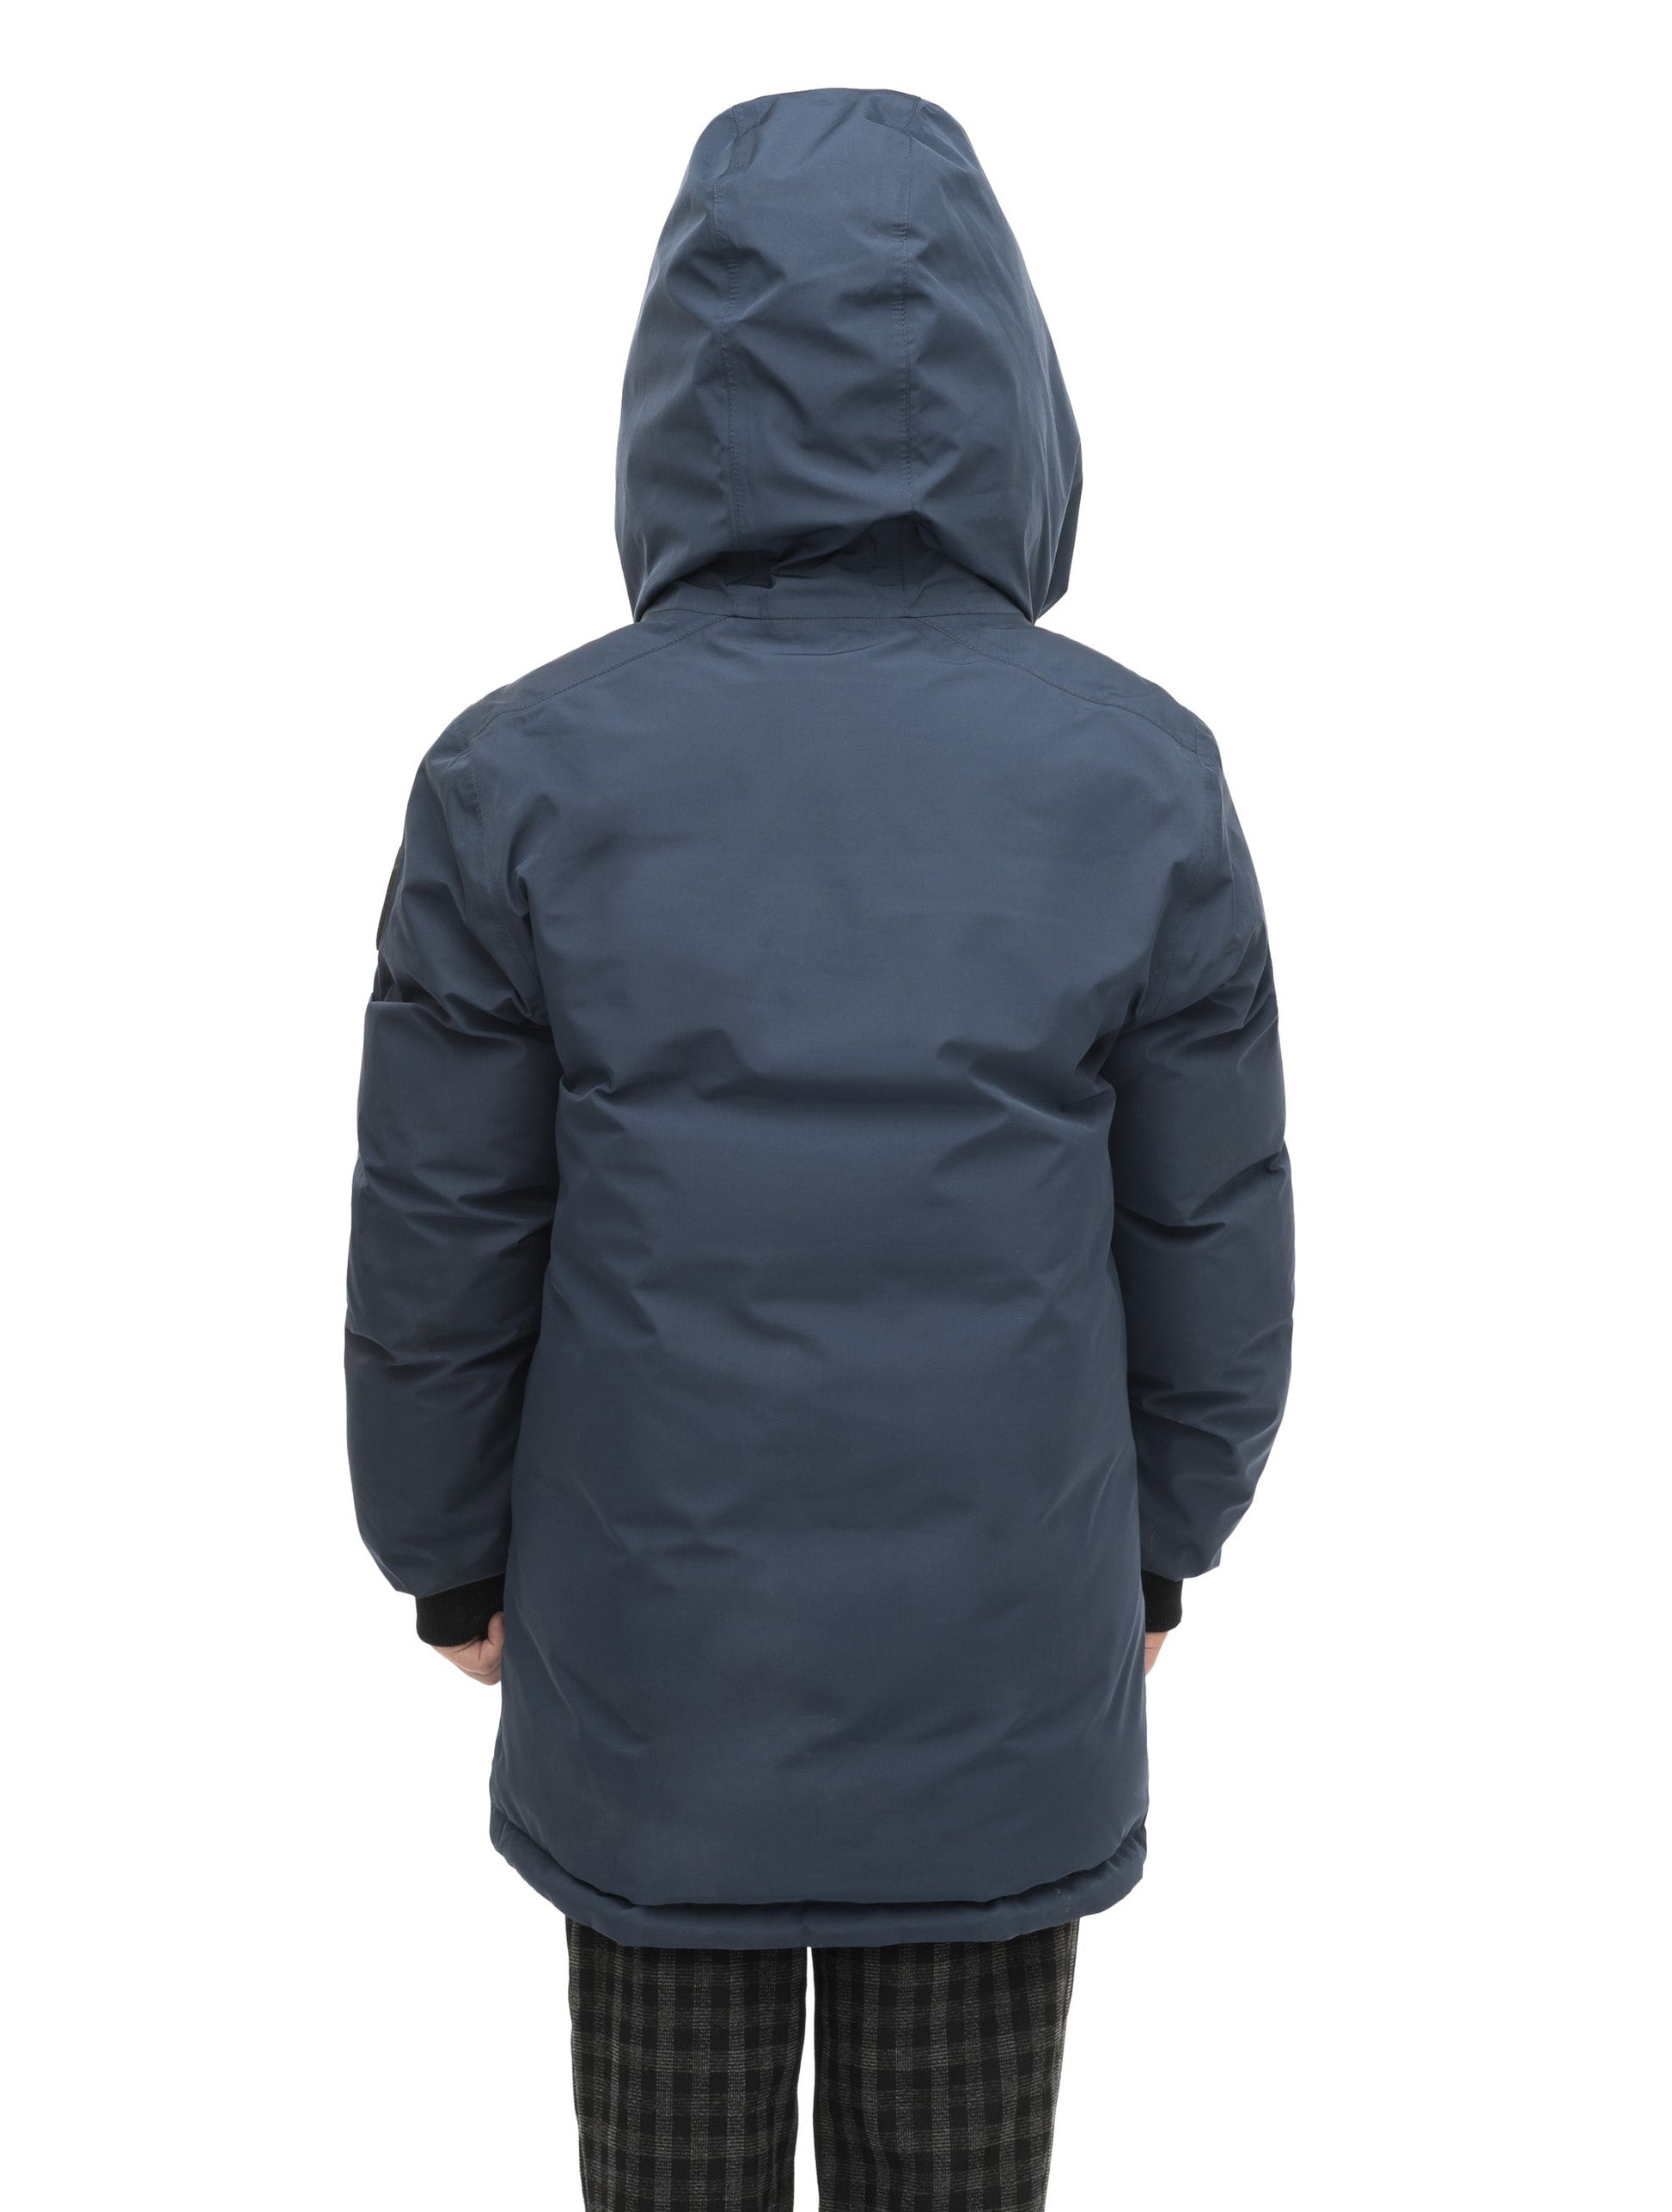 Kids' reversible knee length, down filled parka with waterproof finish in Marine/Citron